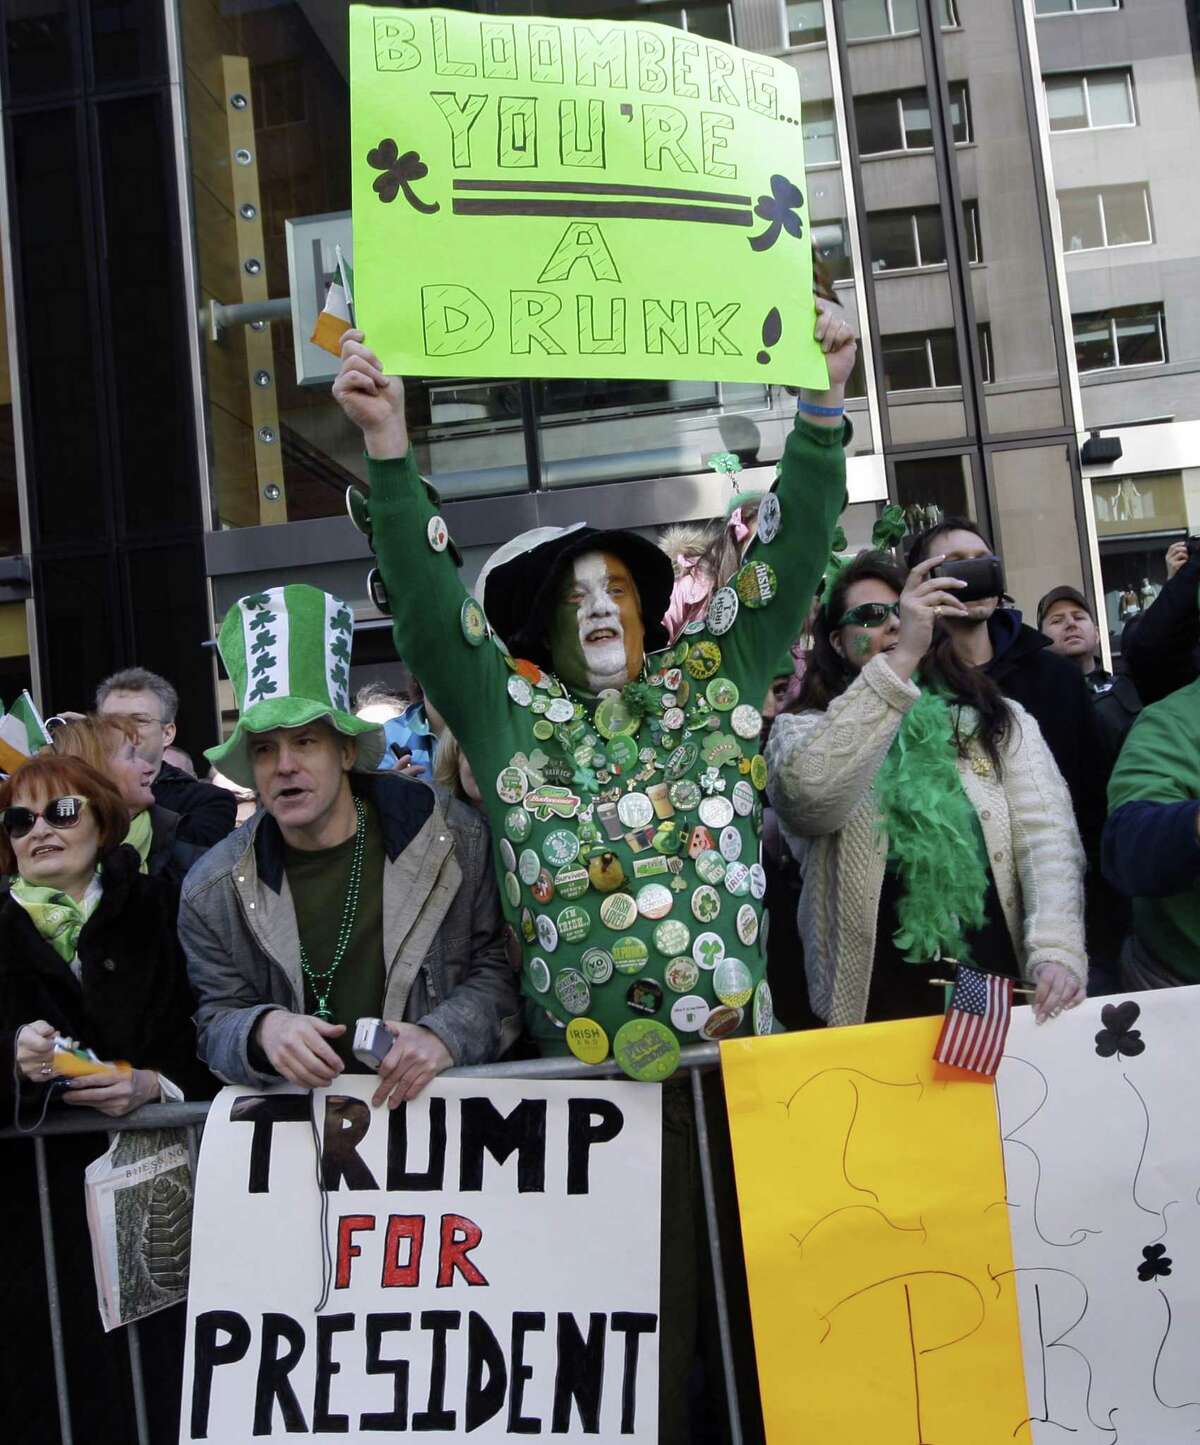 In this March 17, 2011, file photo spectators along the parade route at New York's annual St. Patrick's Day parade show their political feelings in signs, including one favoring 64-year-old real estate tycoon Donald Trump for president. Trump says he'll make a decision by June on whether to join the field of GOP contenders vying to challenge Obama in 2012.